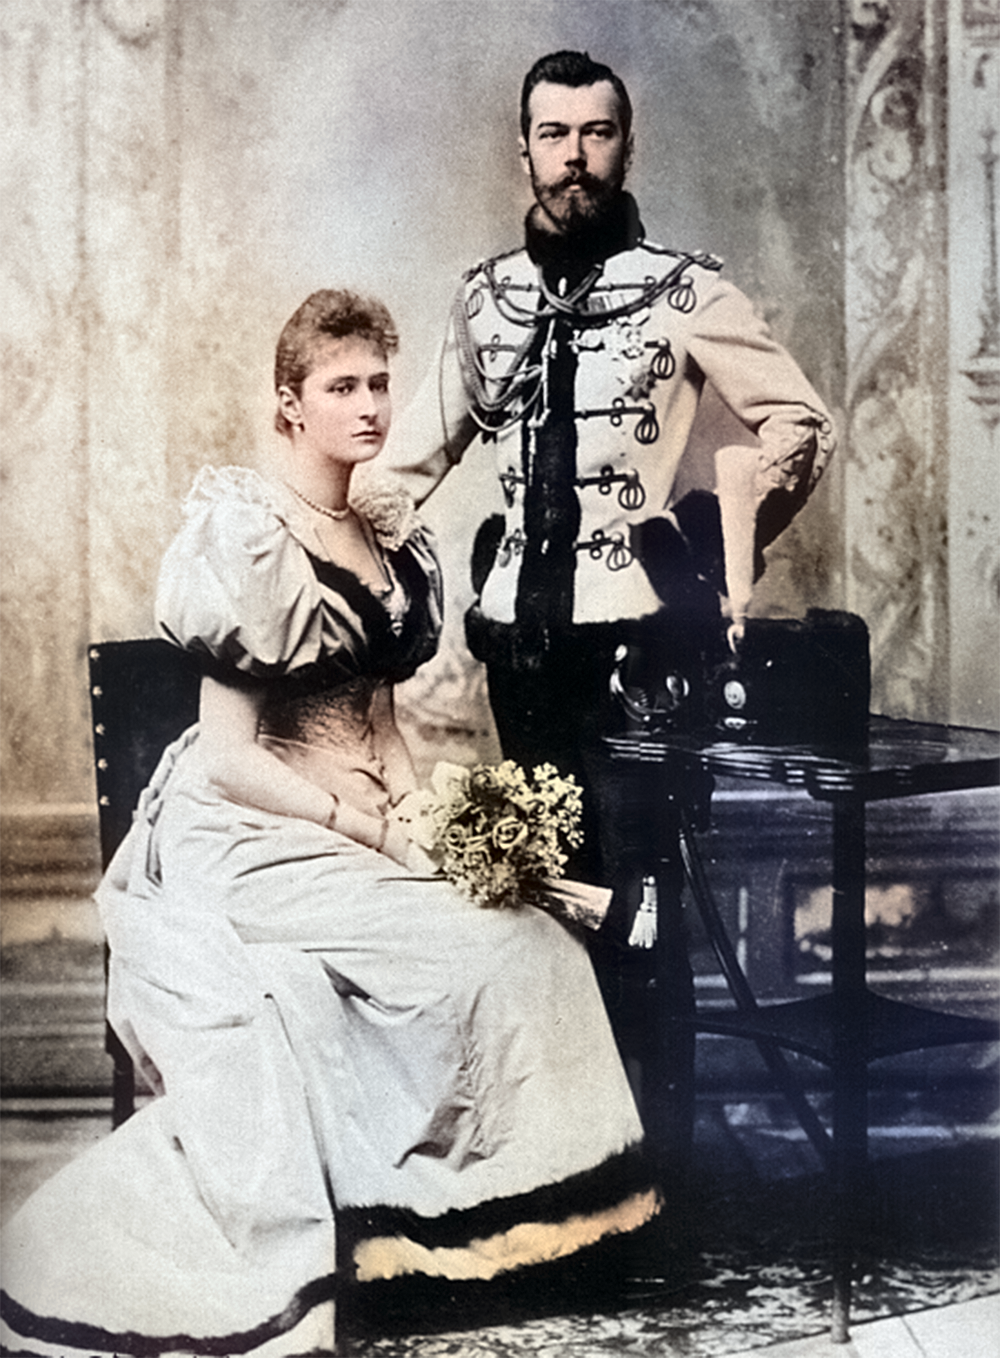 This is a colorized photograph of two people sitting in a formal setting. The man is wearing a elaborate formal suit and the woman is wearing a long dress with a train. The man has a stern expression on his face and the woman looks very worried.